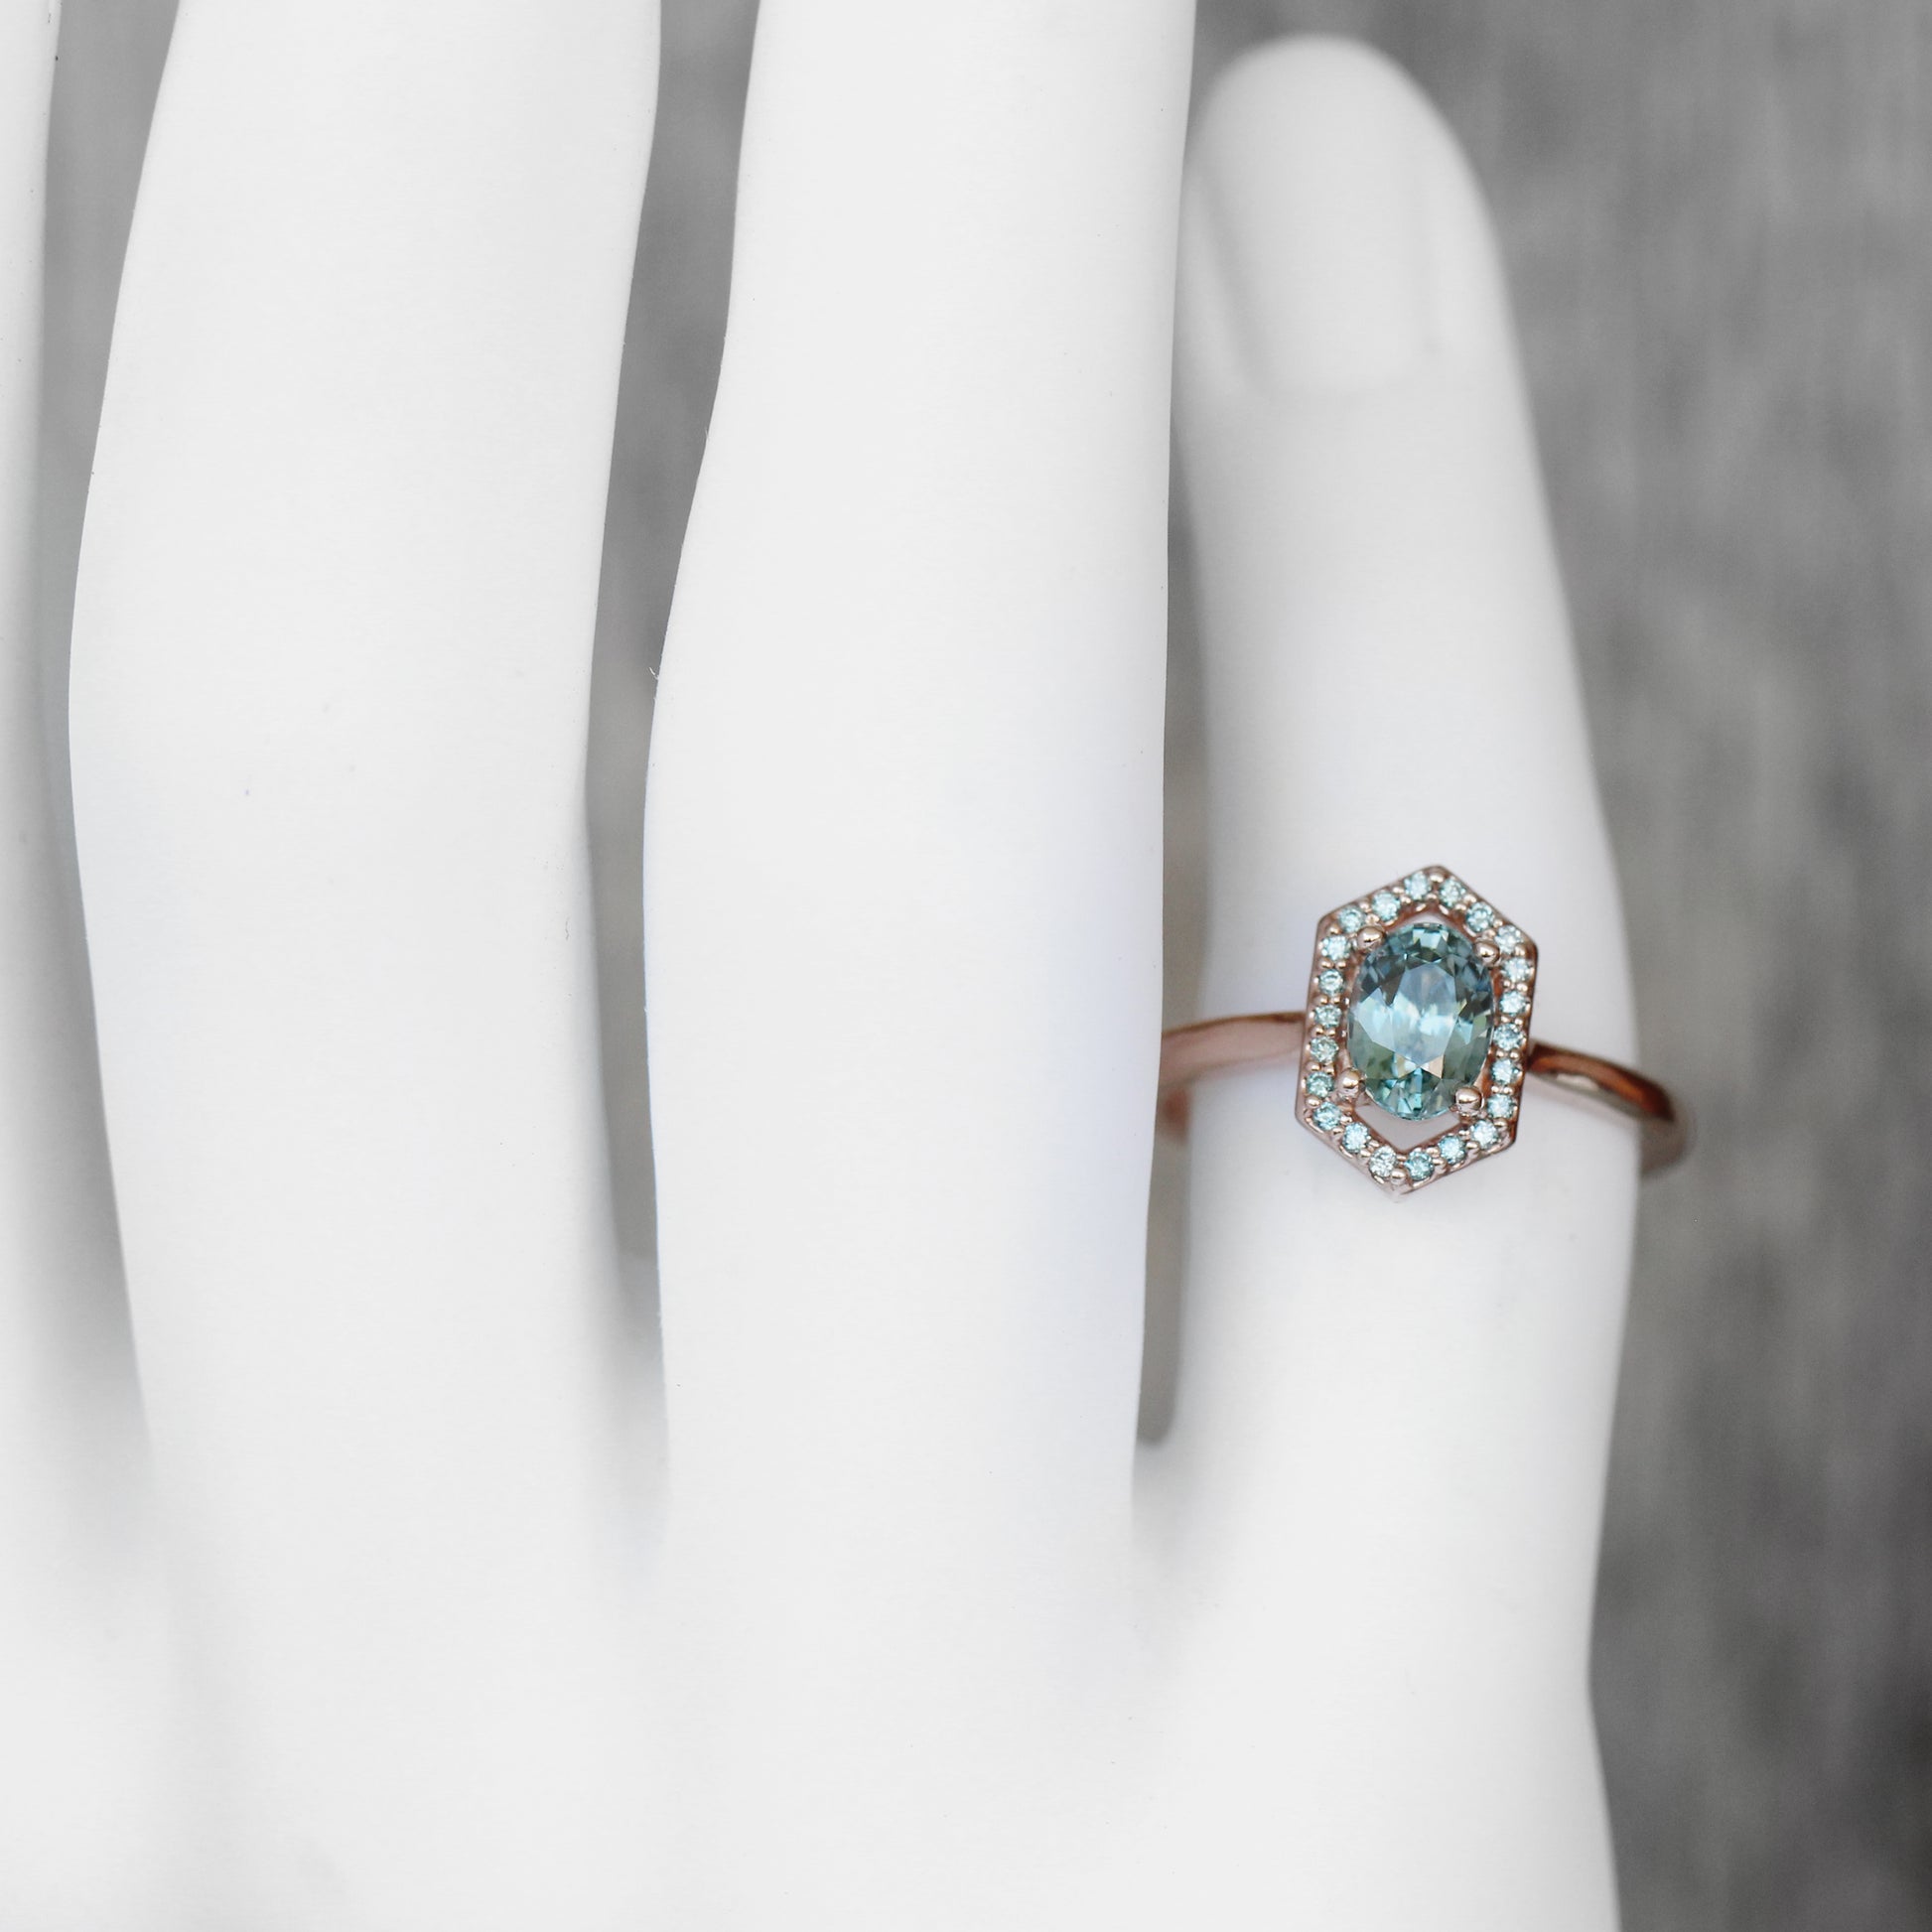 Etta ring with blue zircon and aqua diamonds - 14k gold of choice - made to order - Midwinter Co. Alternative Bridal Rings and Modern Fine Jewelry